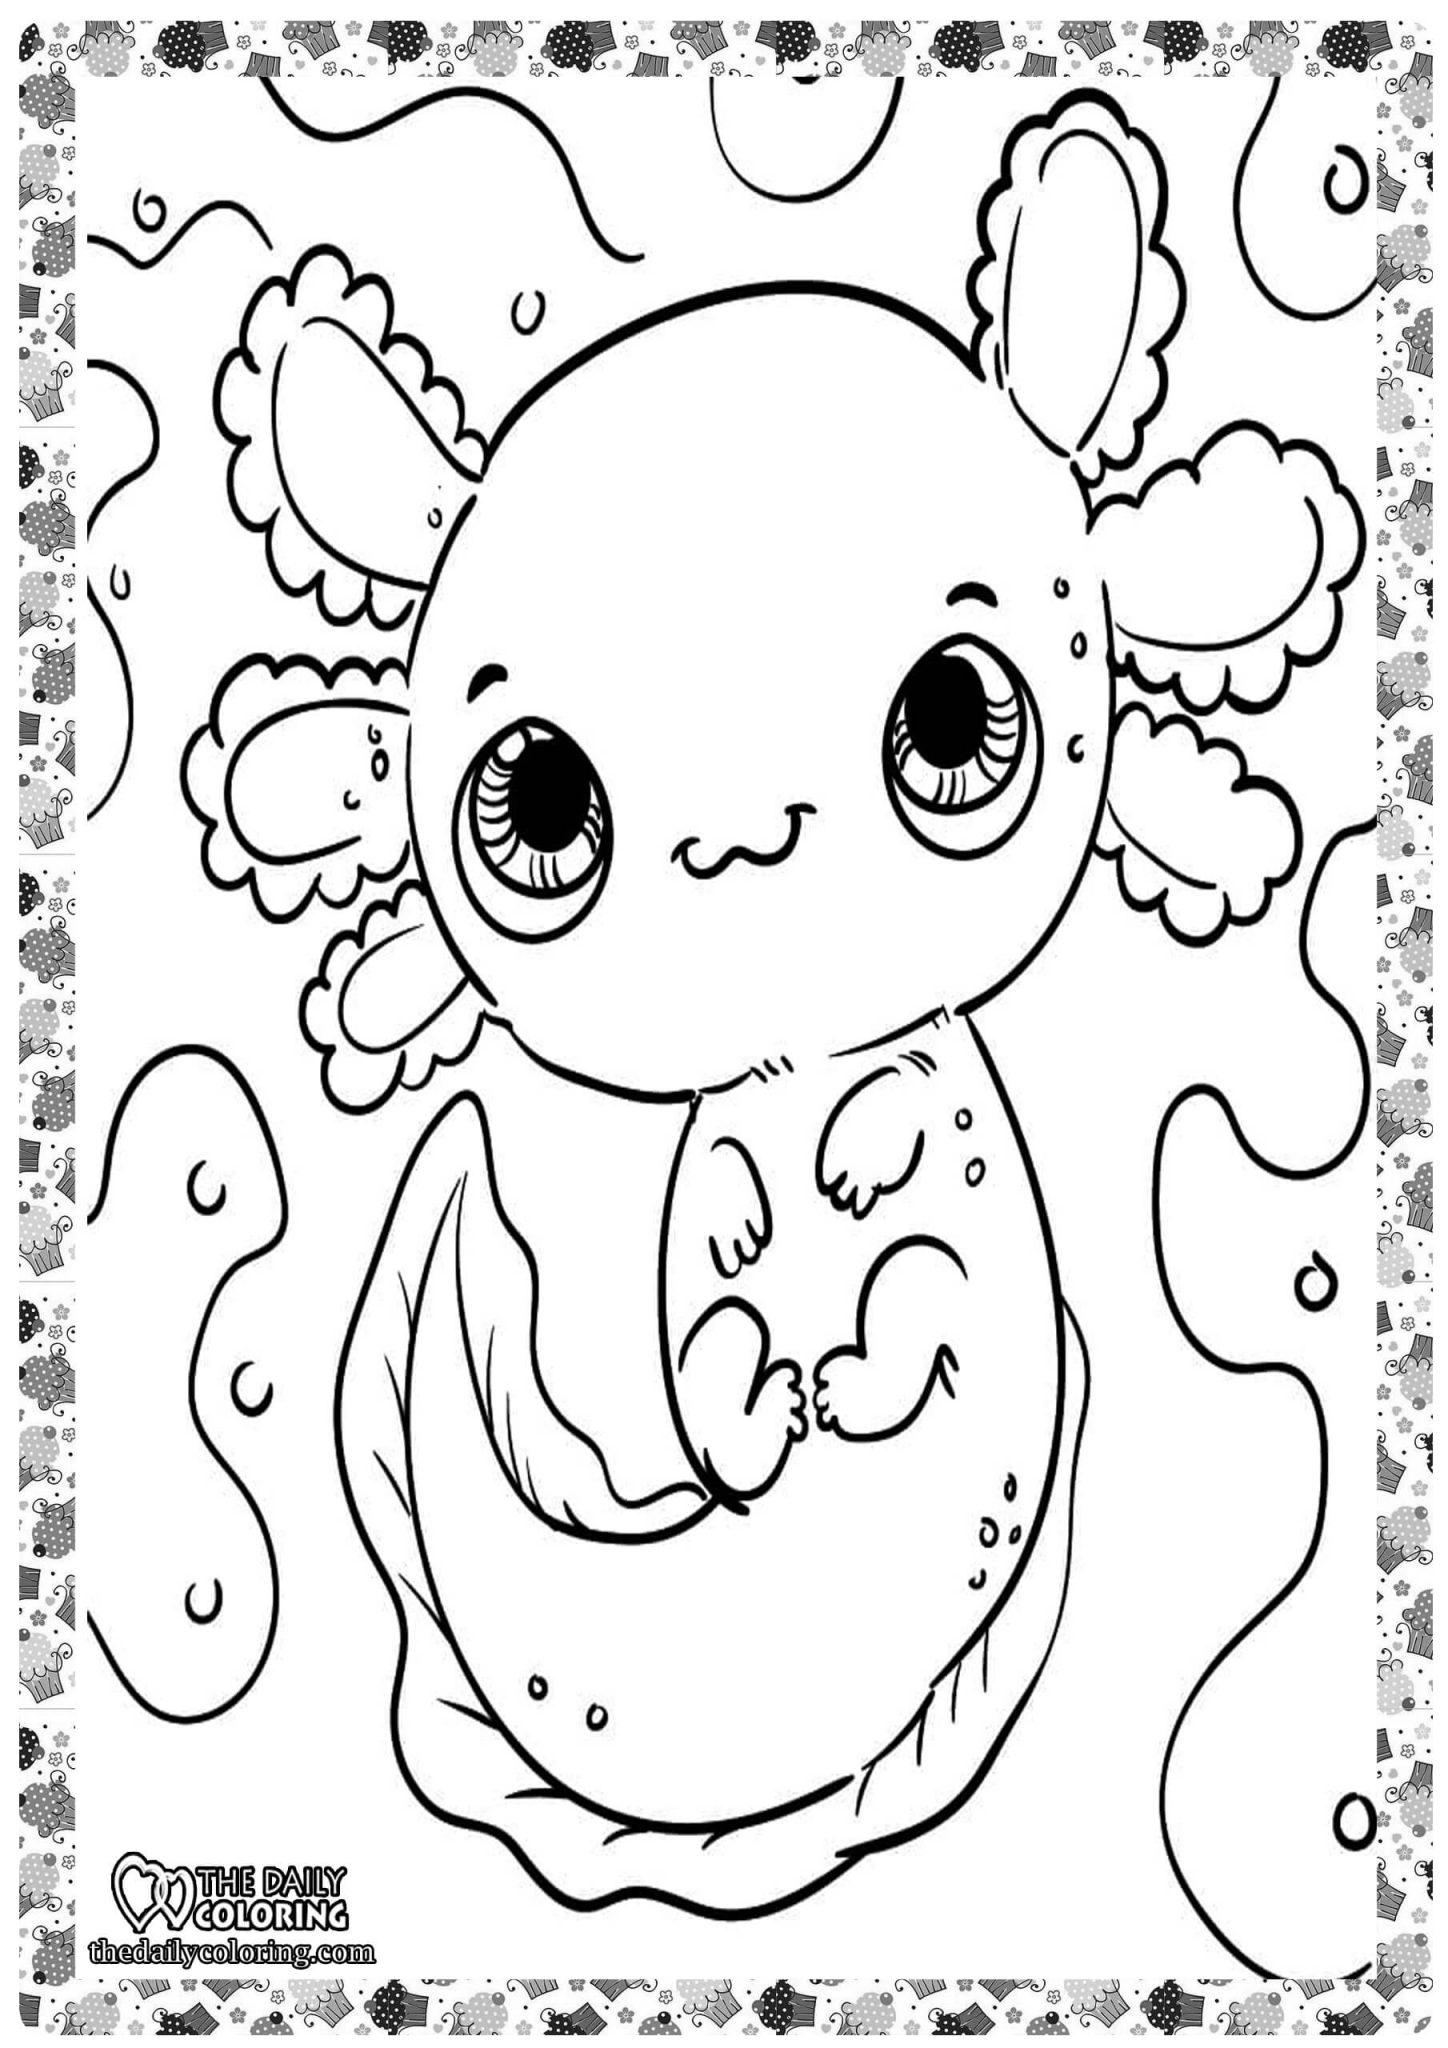 free-axolotl-coloring-pages-red-ted-art-easy-kids-crafts